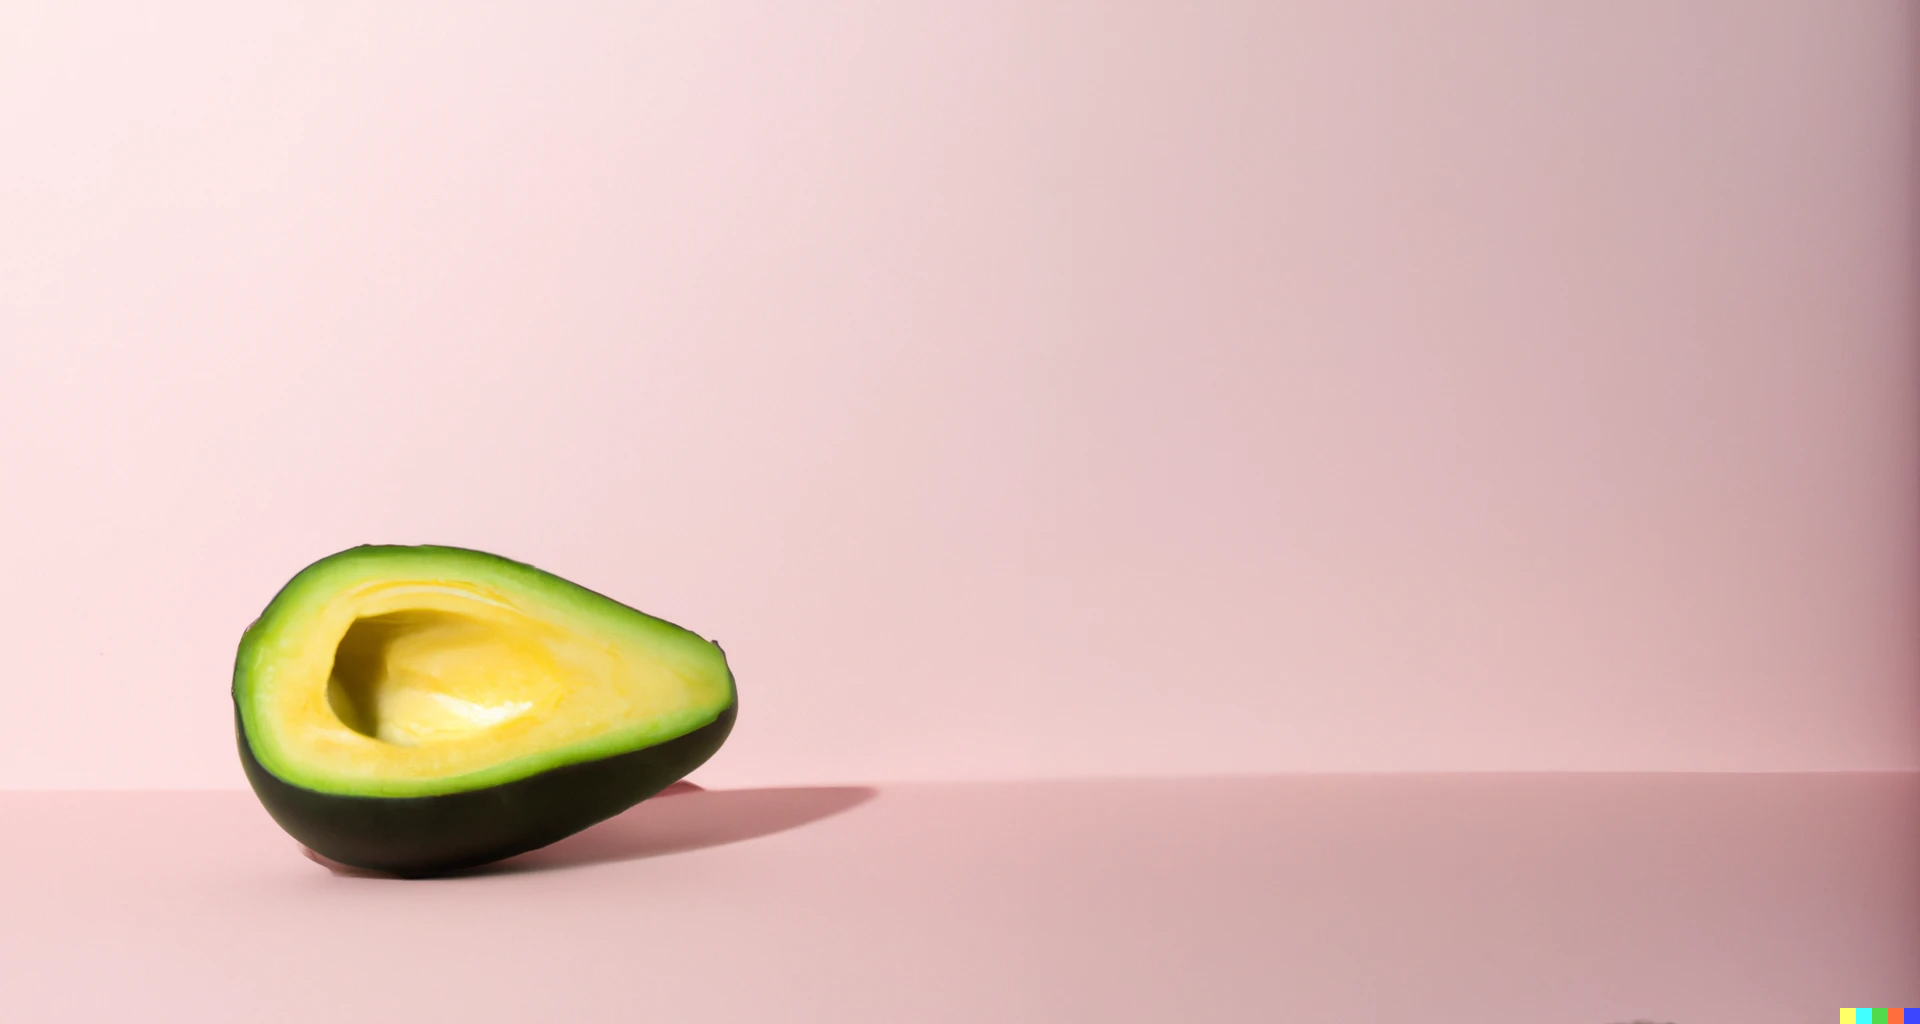 An avocado on a pink background